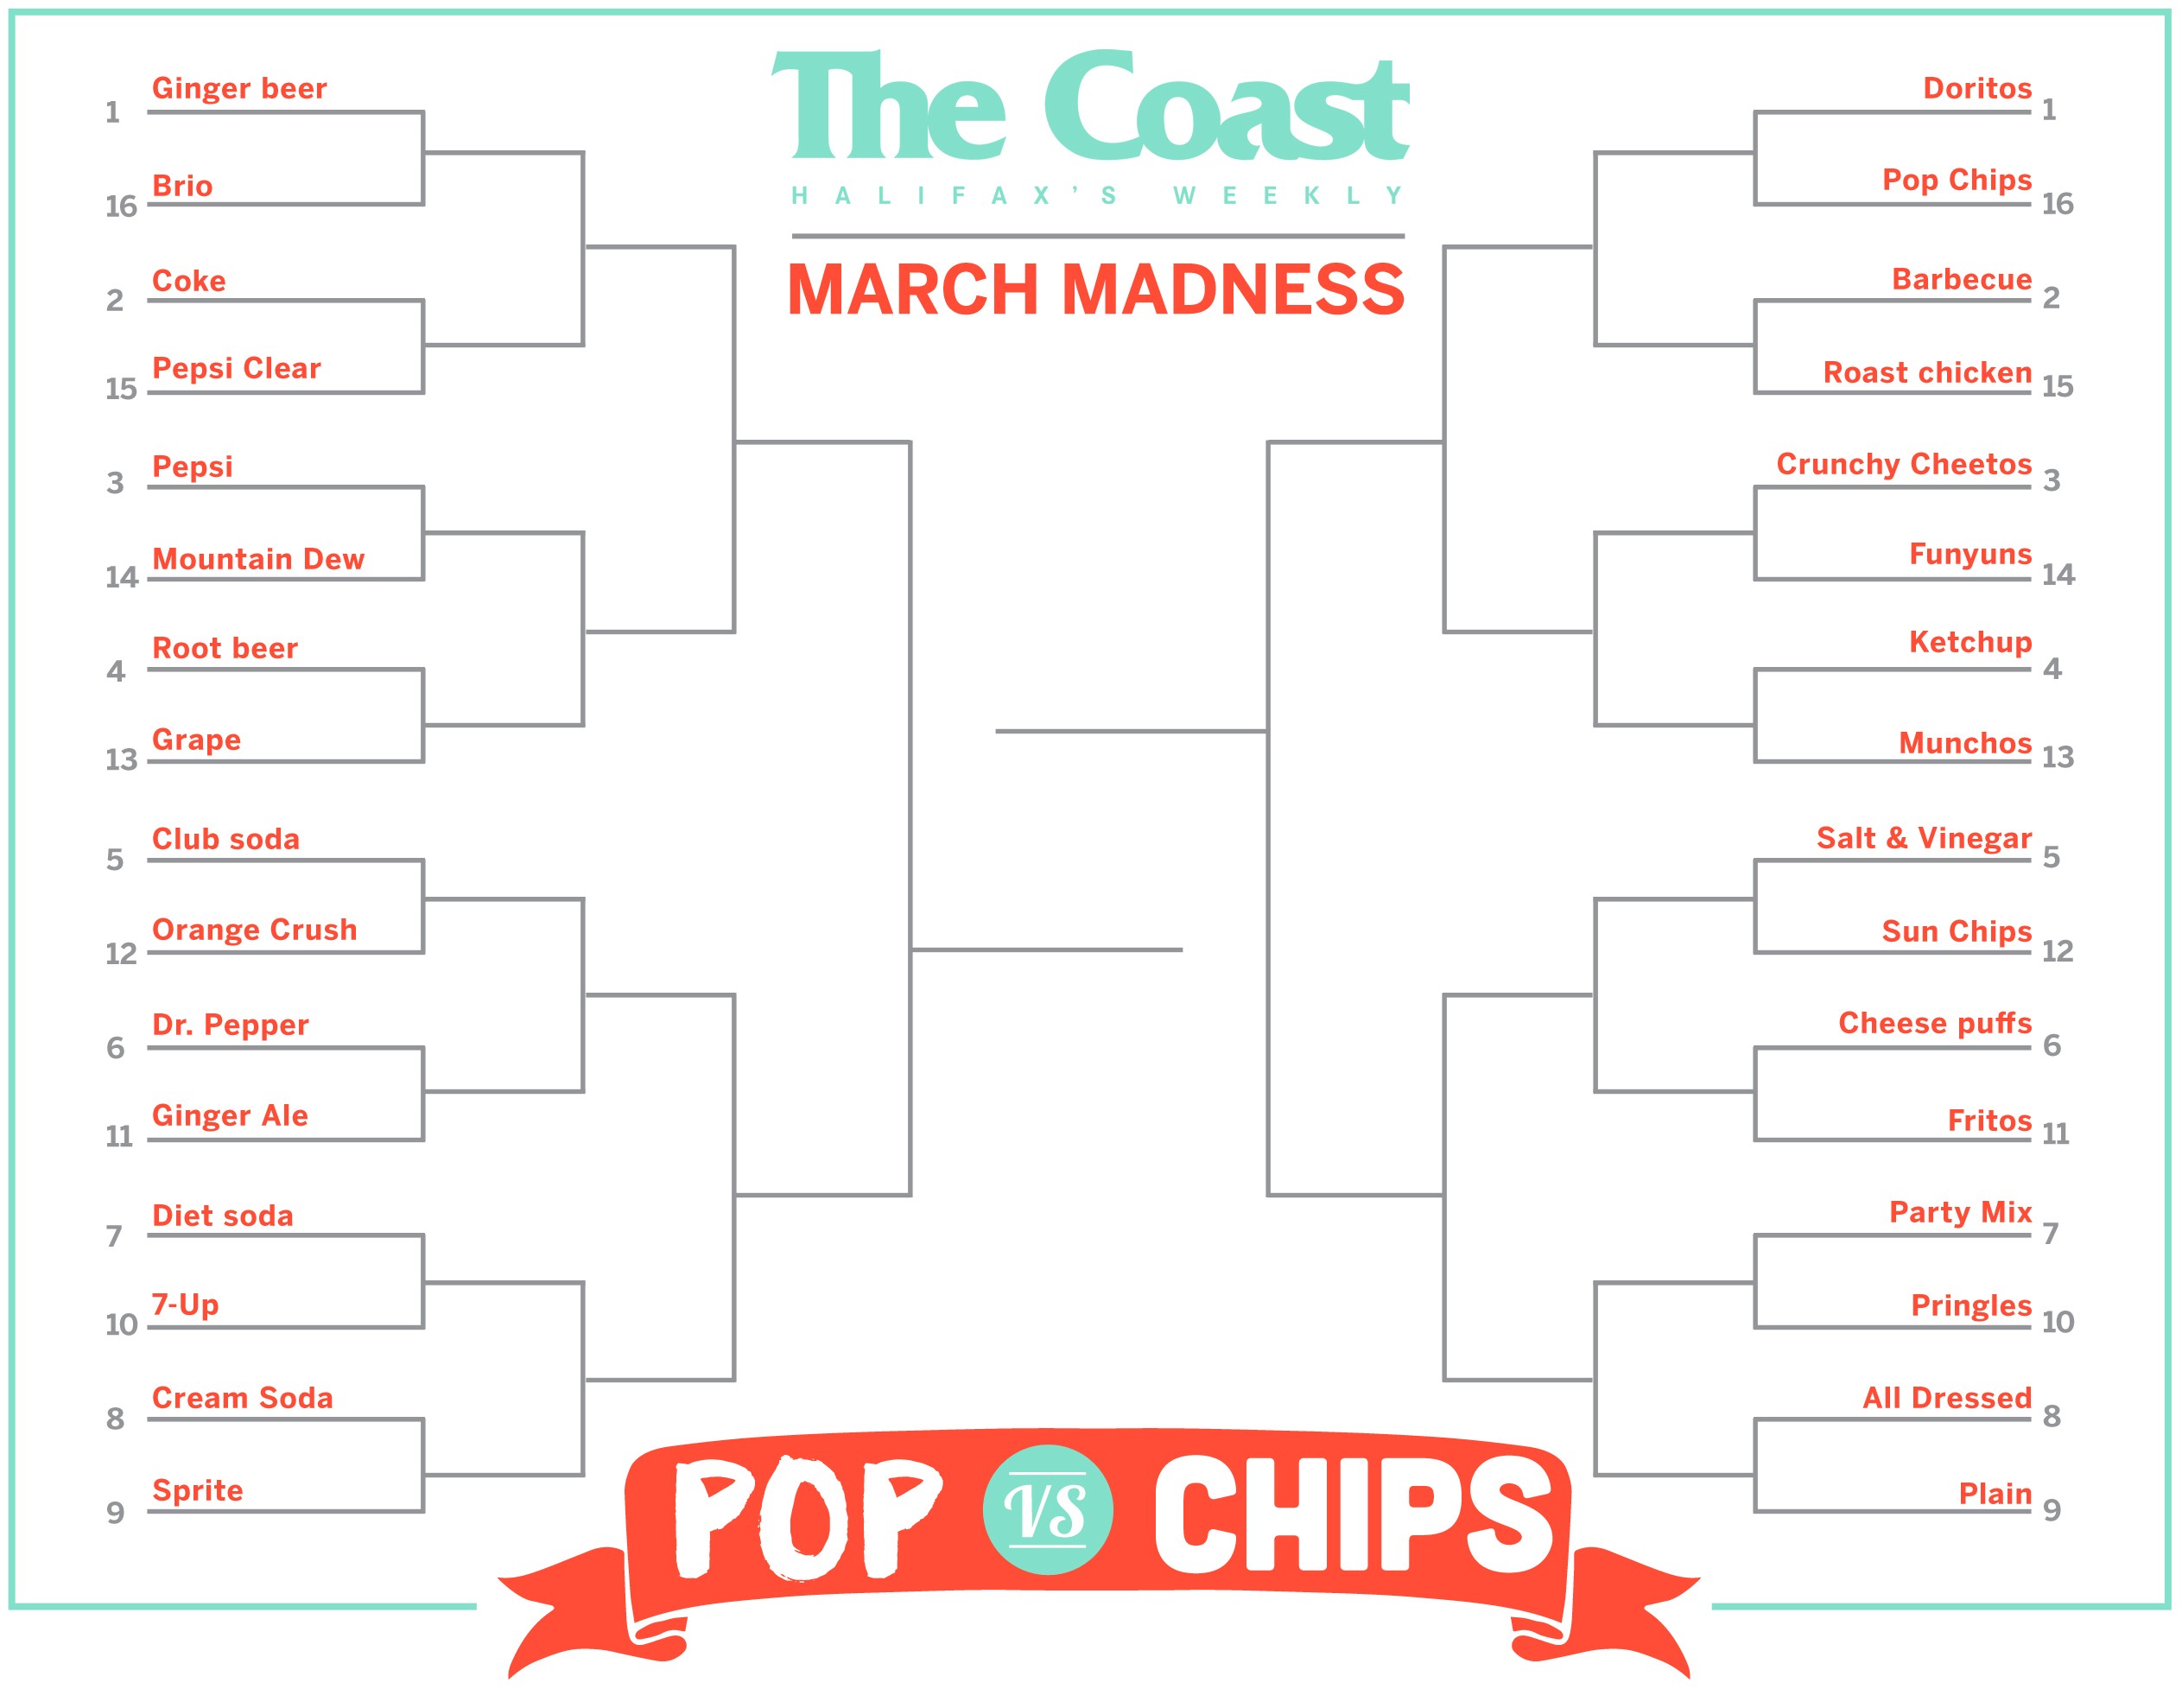 March Madness: Chips vs Pop starts TODAY